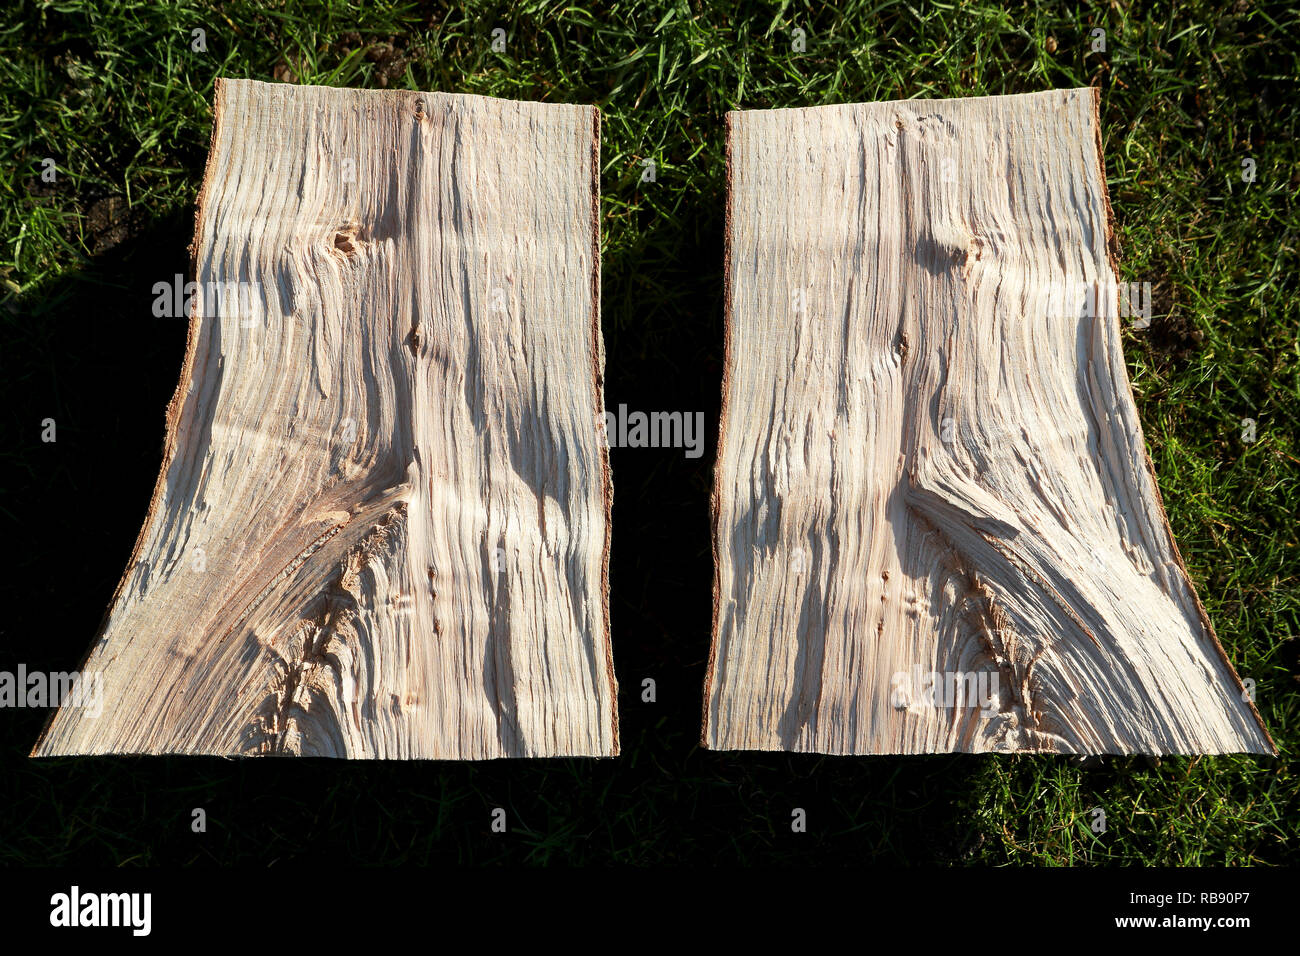 A perfectly split log from an ash tree showing grain structure of the wood  Stock Photo - Alamy